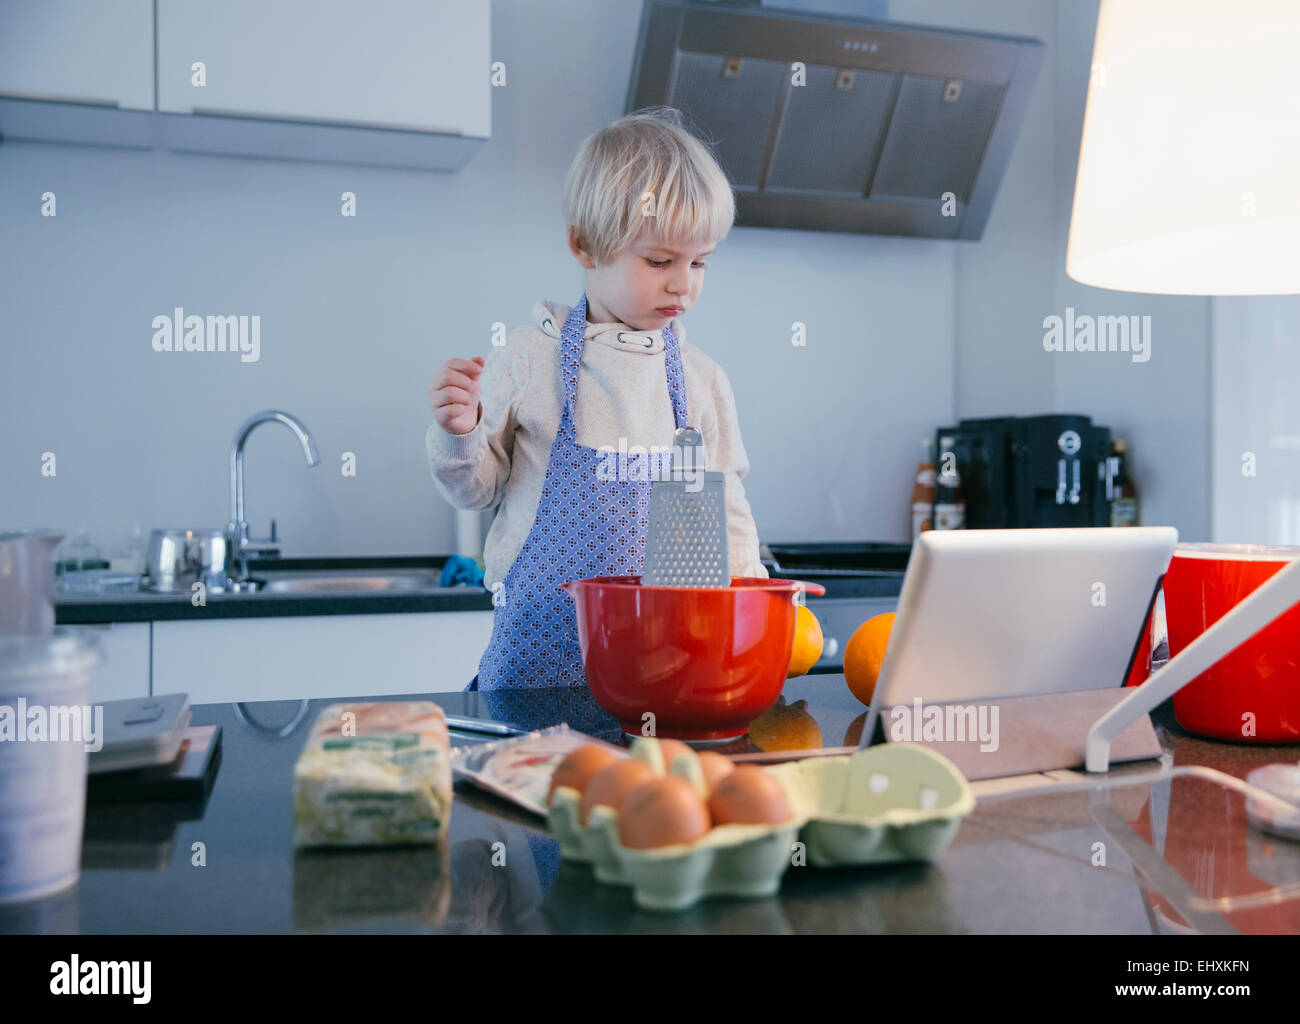 Little boy standing in the kitchen baking with help of digital tablet Stock Photo